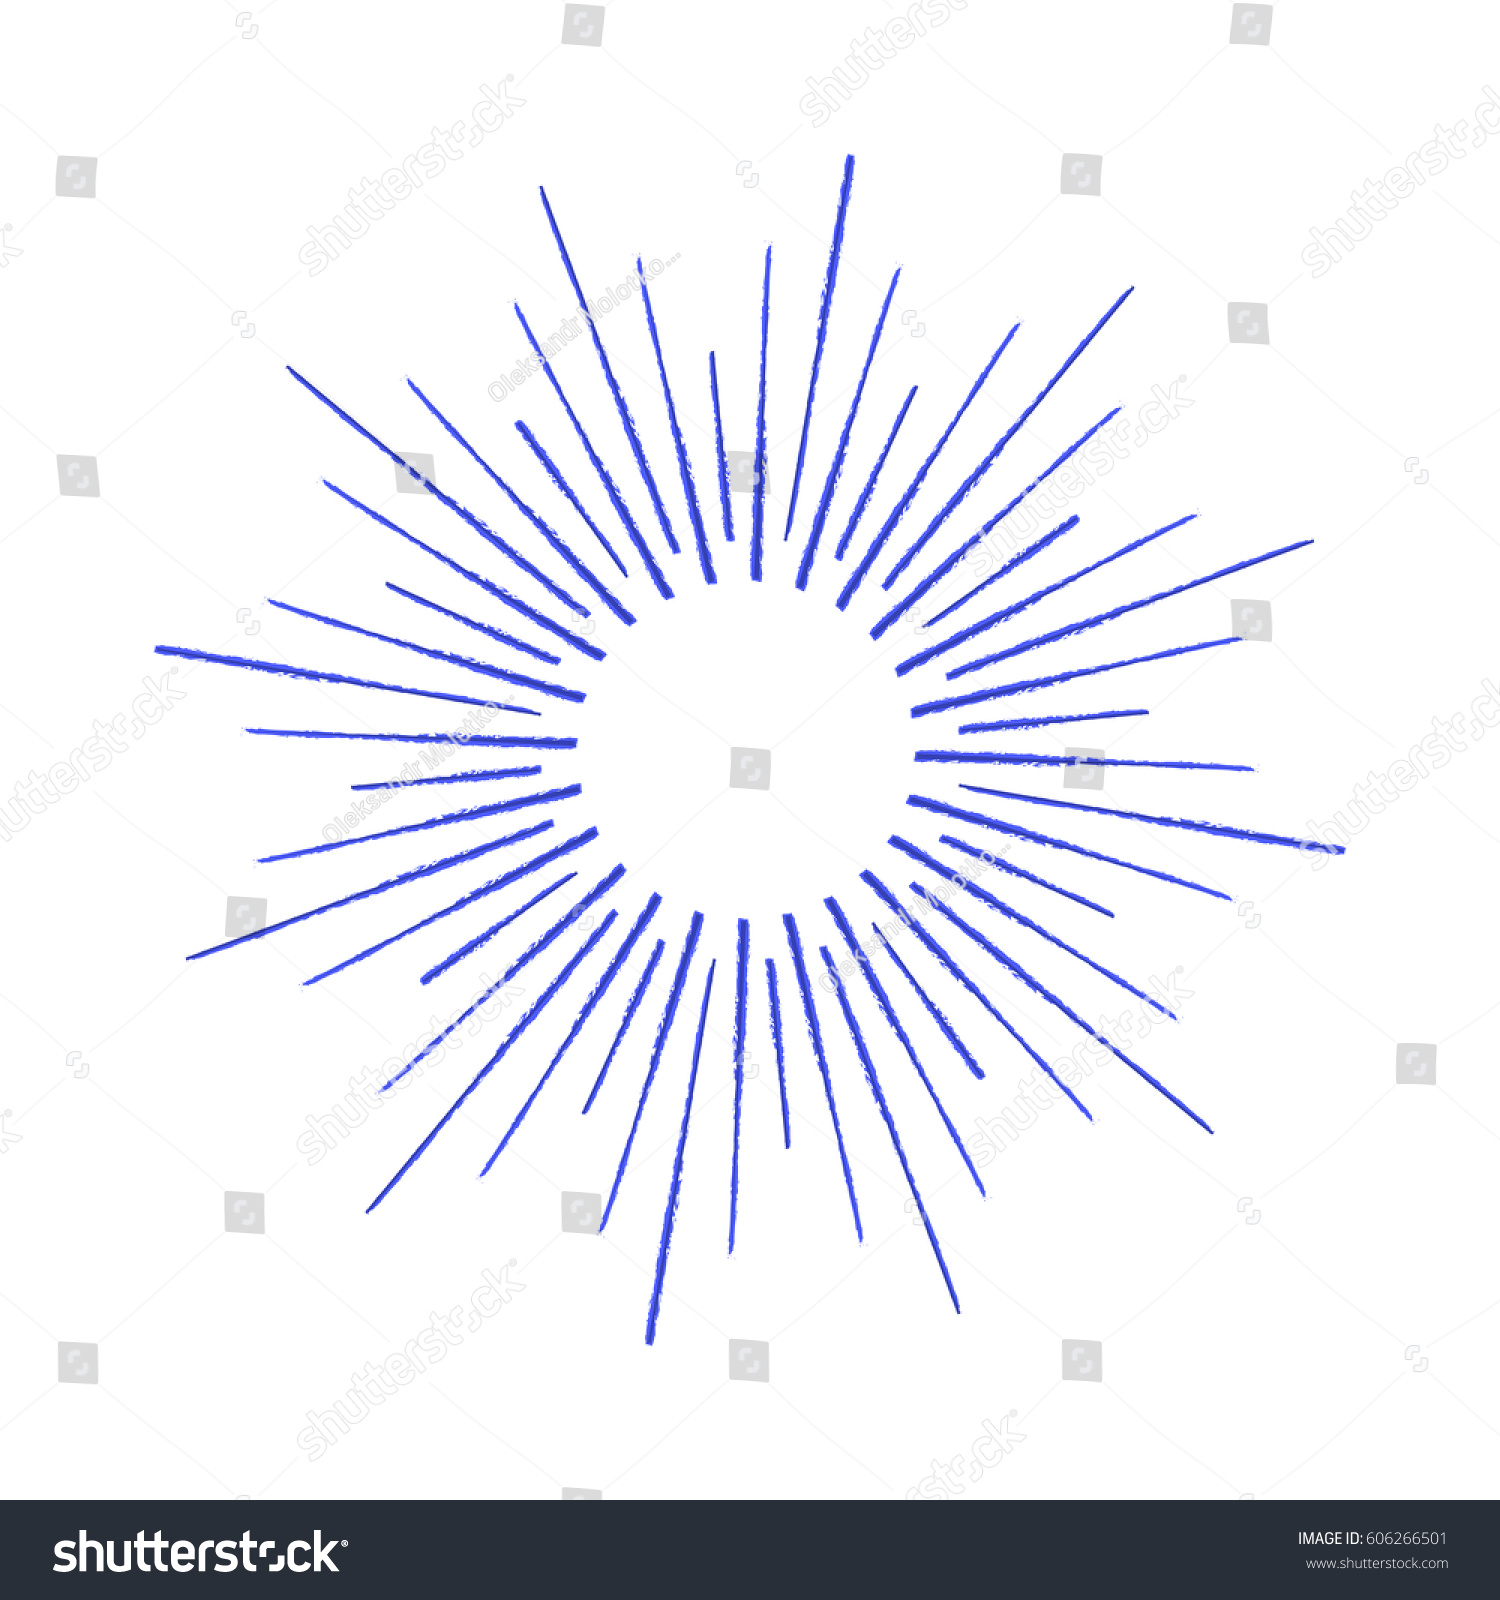 Linear Drawing Rays Sun By Ink Stock Vector (Royalty Free) 606266501